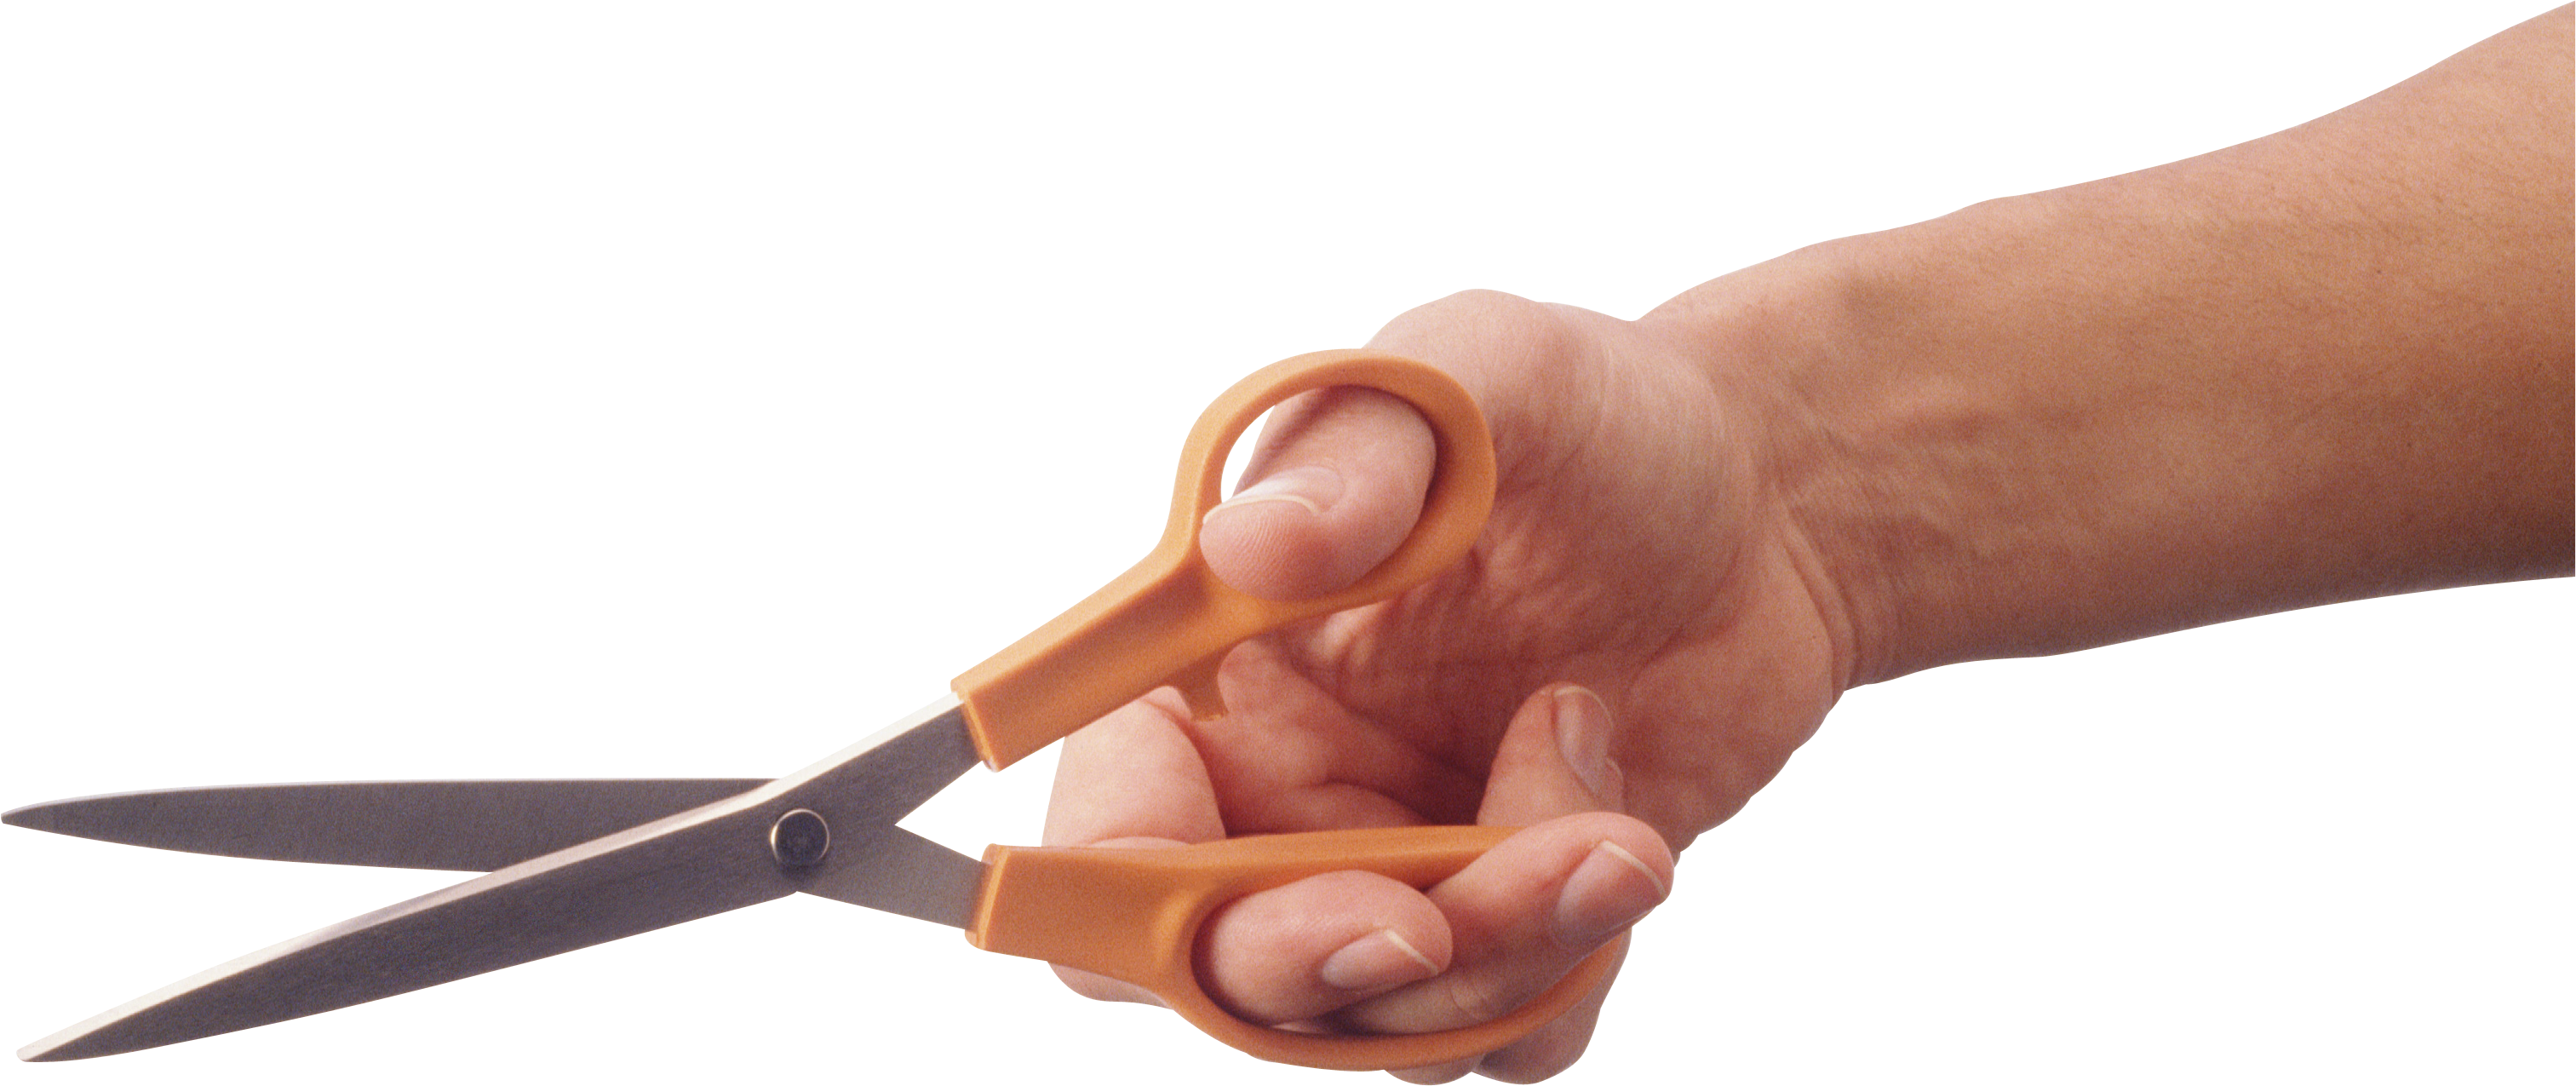 Cigarette clipart hand holding. Scissors one isolated stock